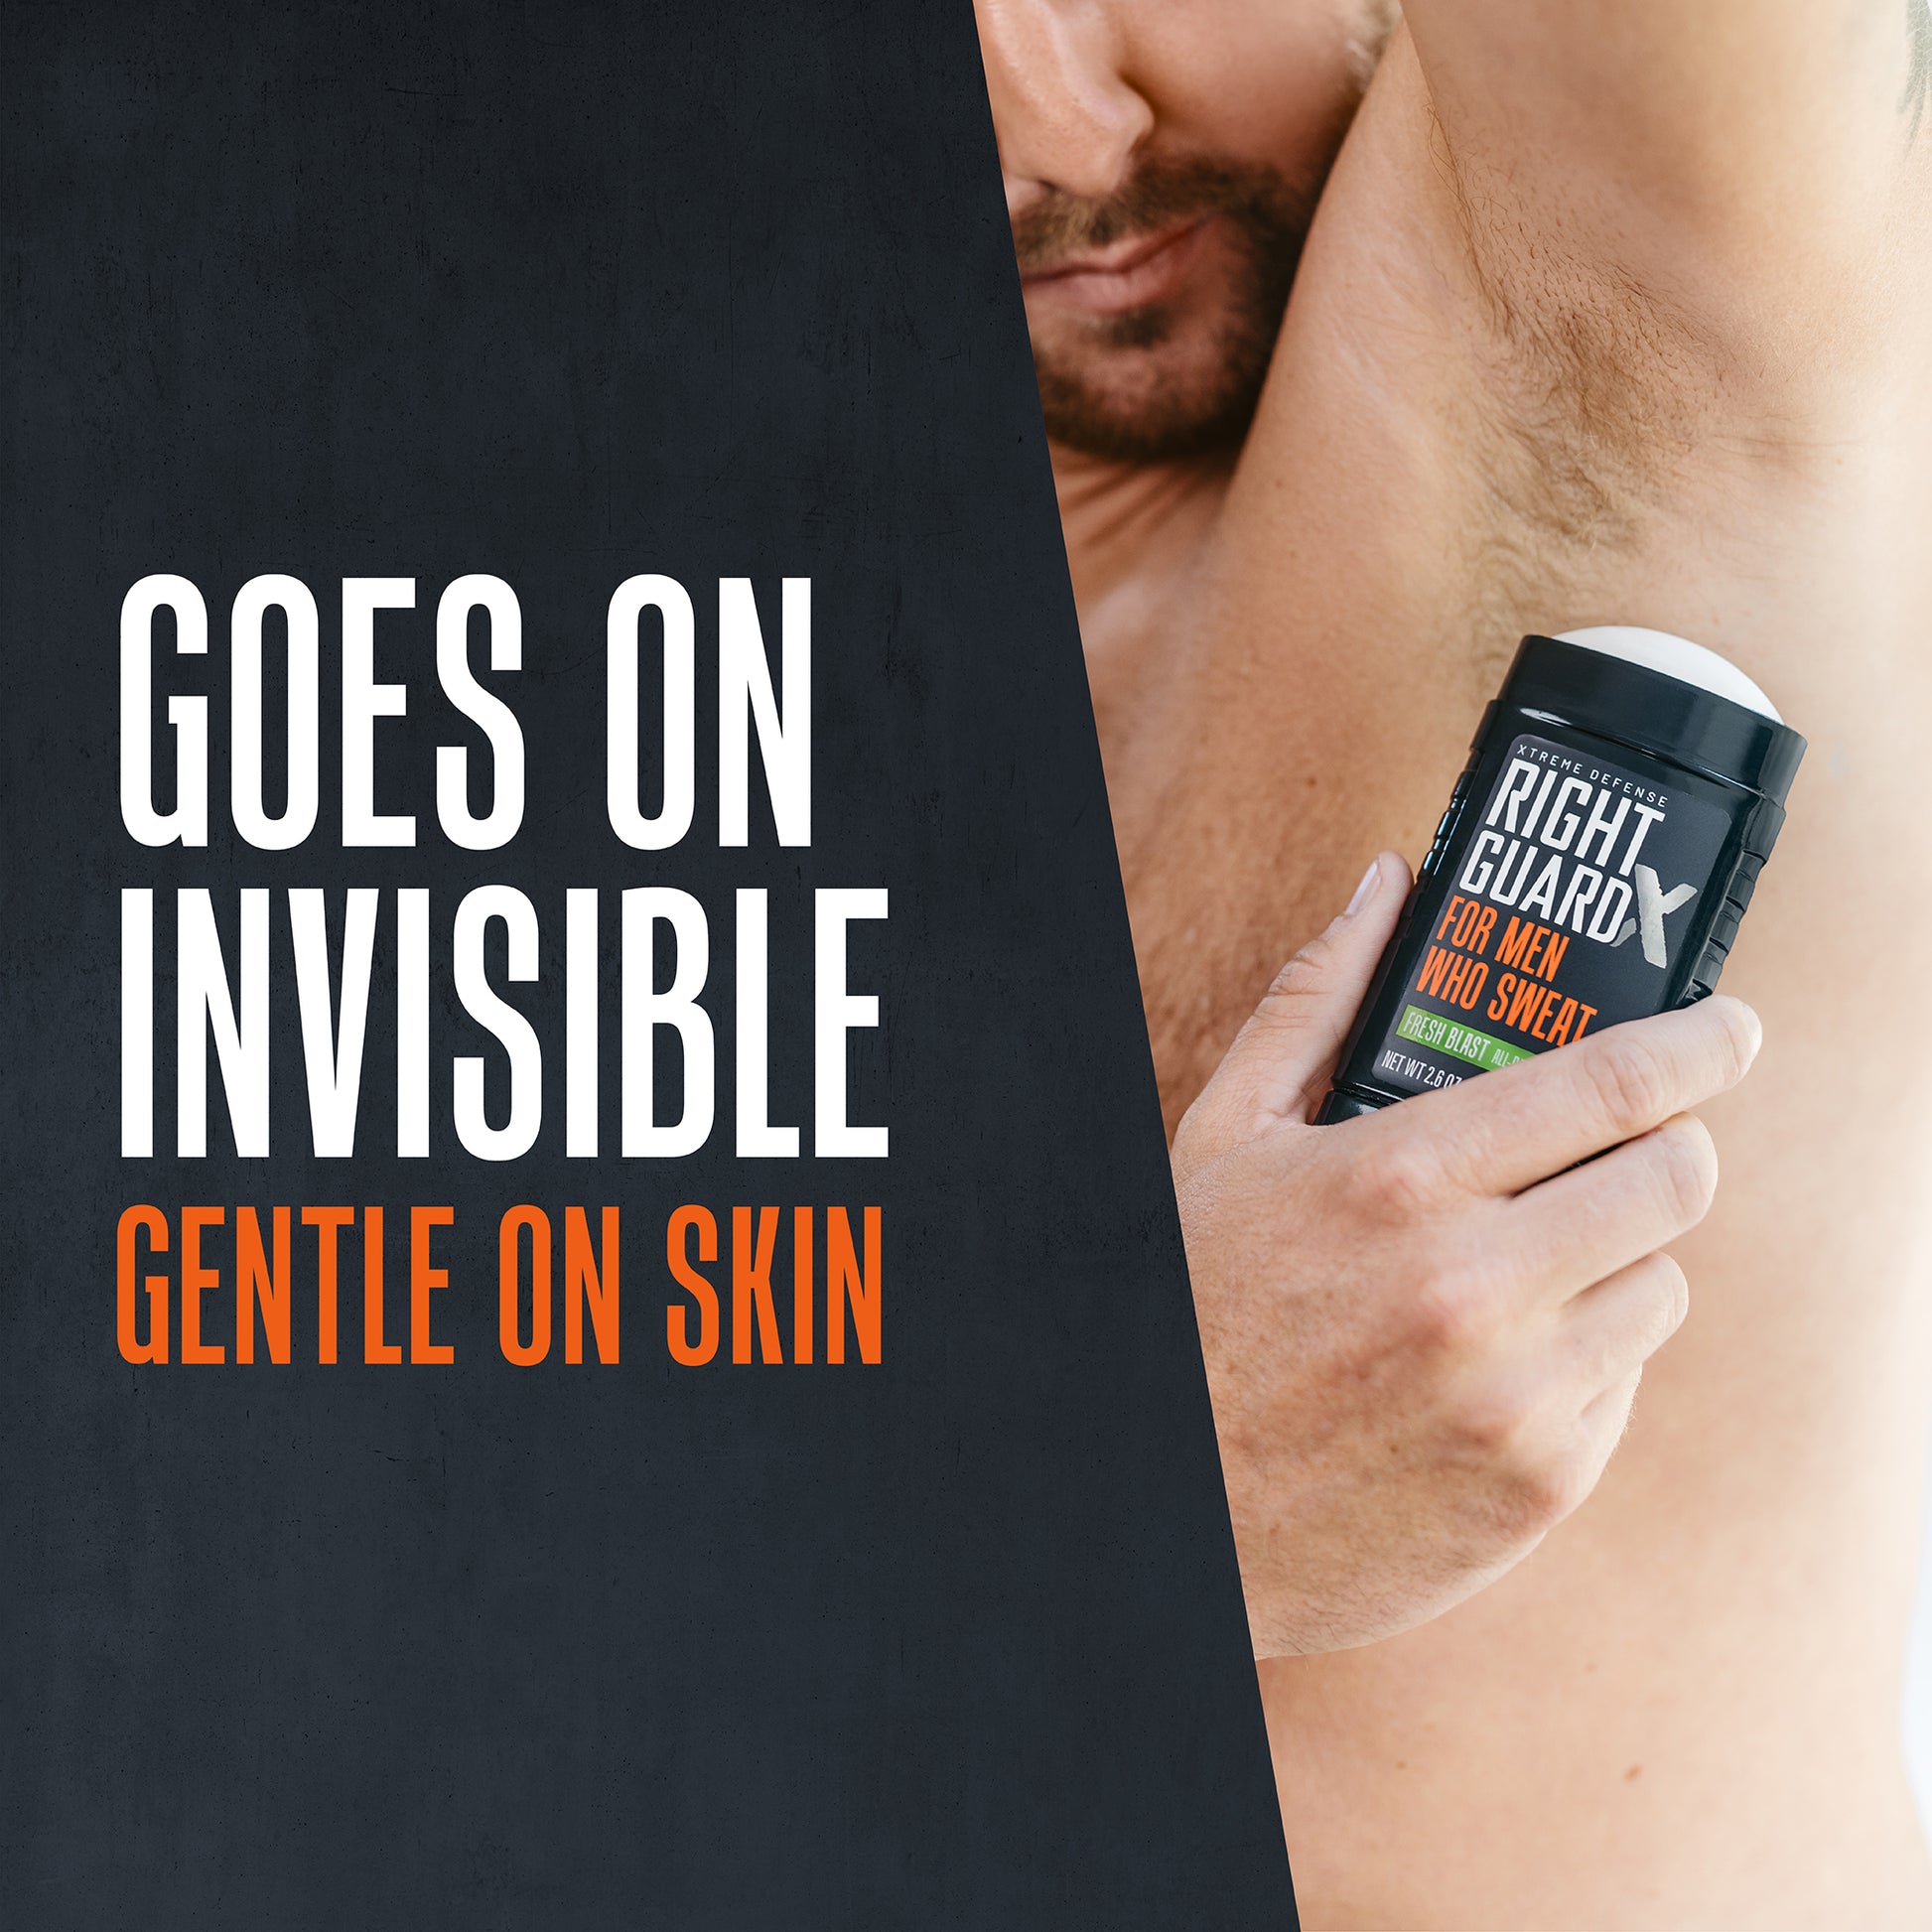 Goes on invisible gentle on skin